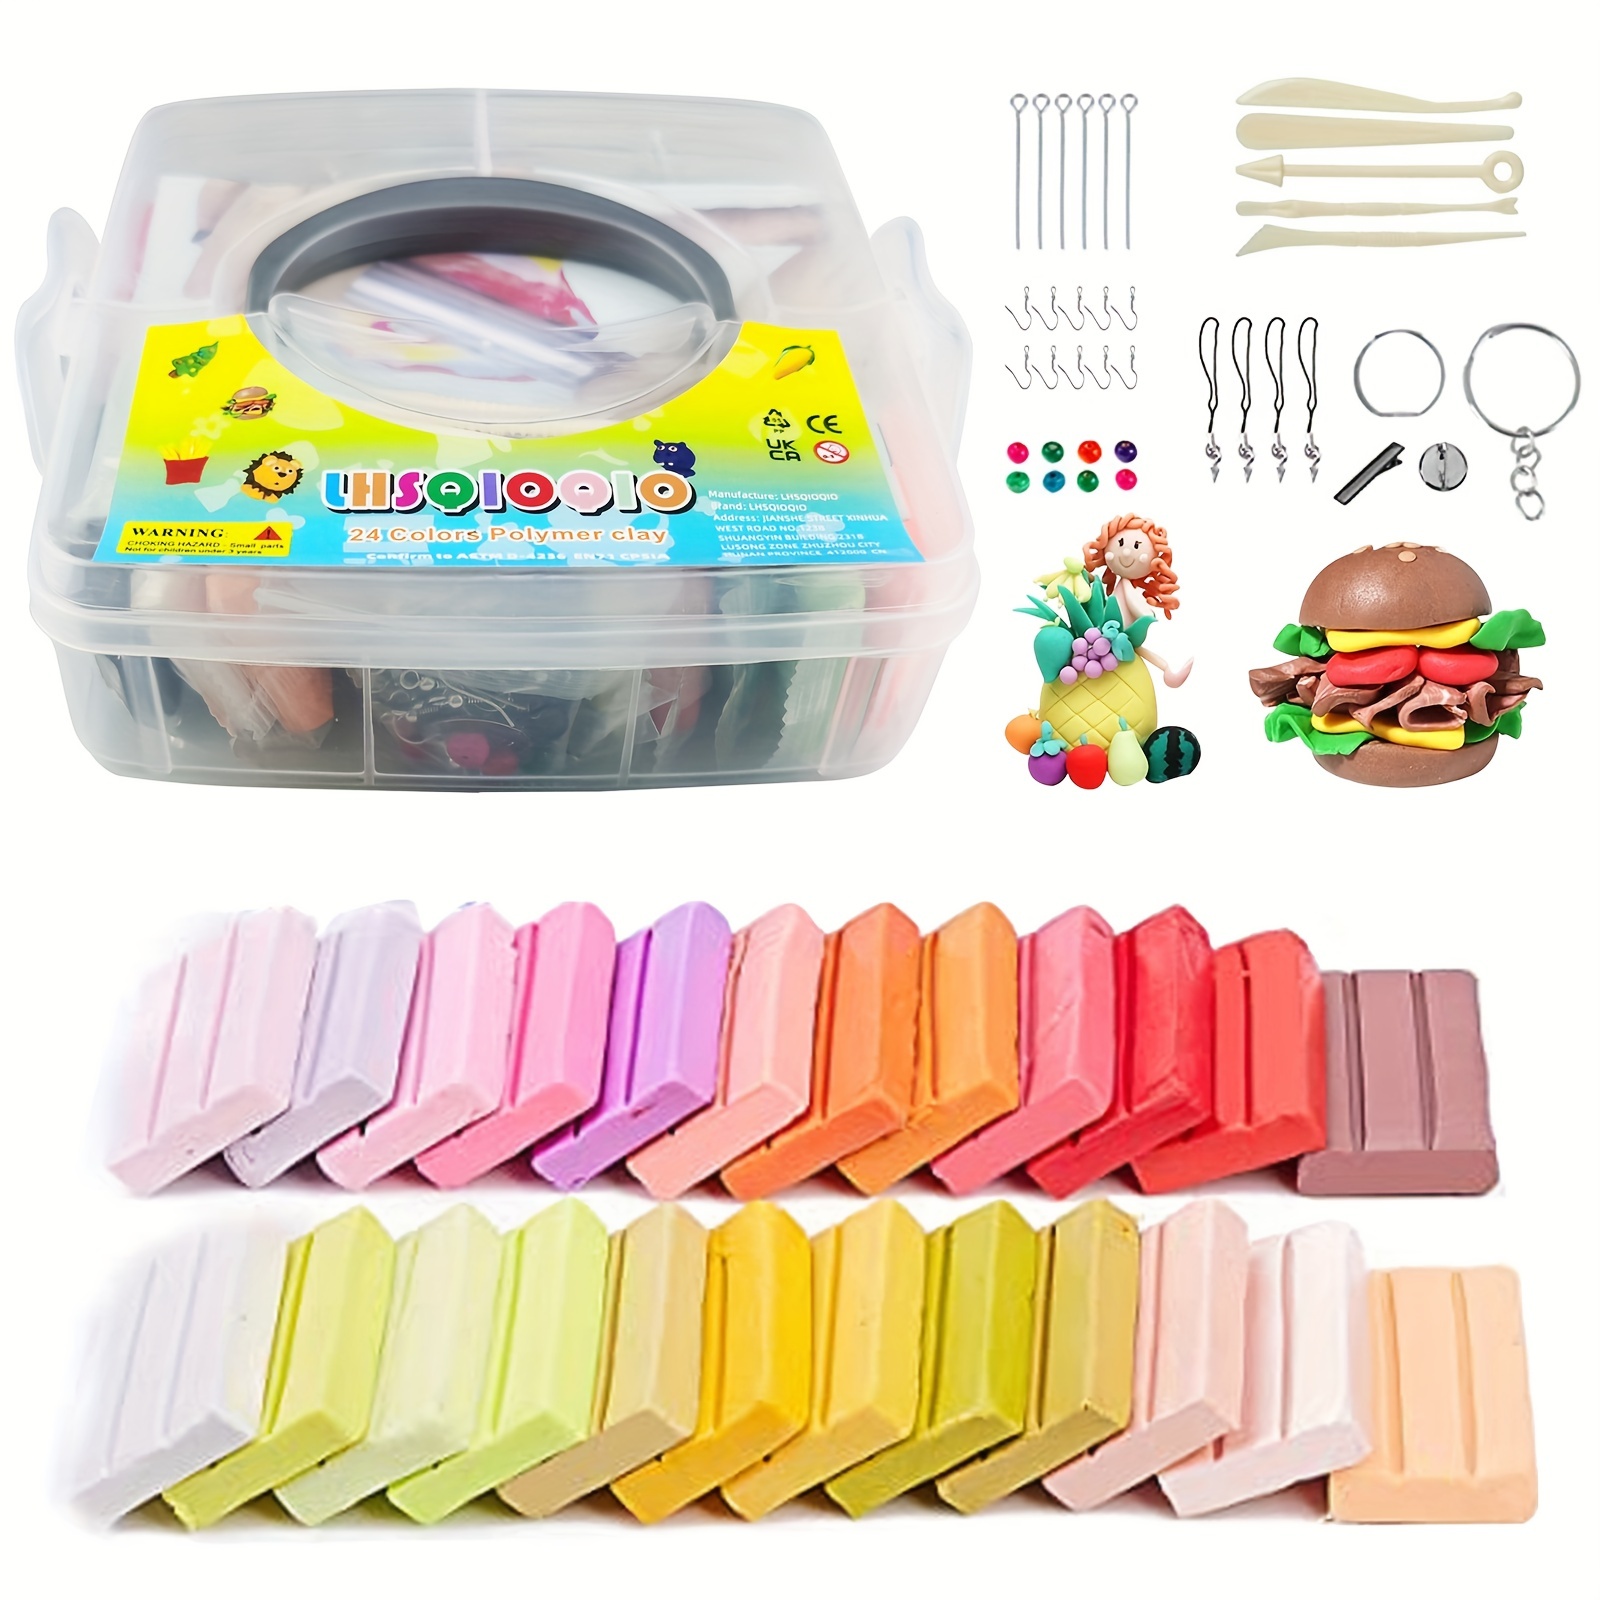 Polymer Clay Set 48 Colors Modeling Clay Sculpting and Oven Bake Kit Baking and Molding